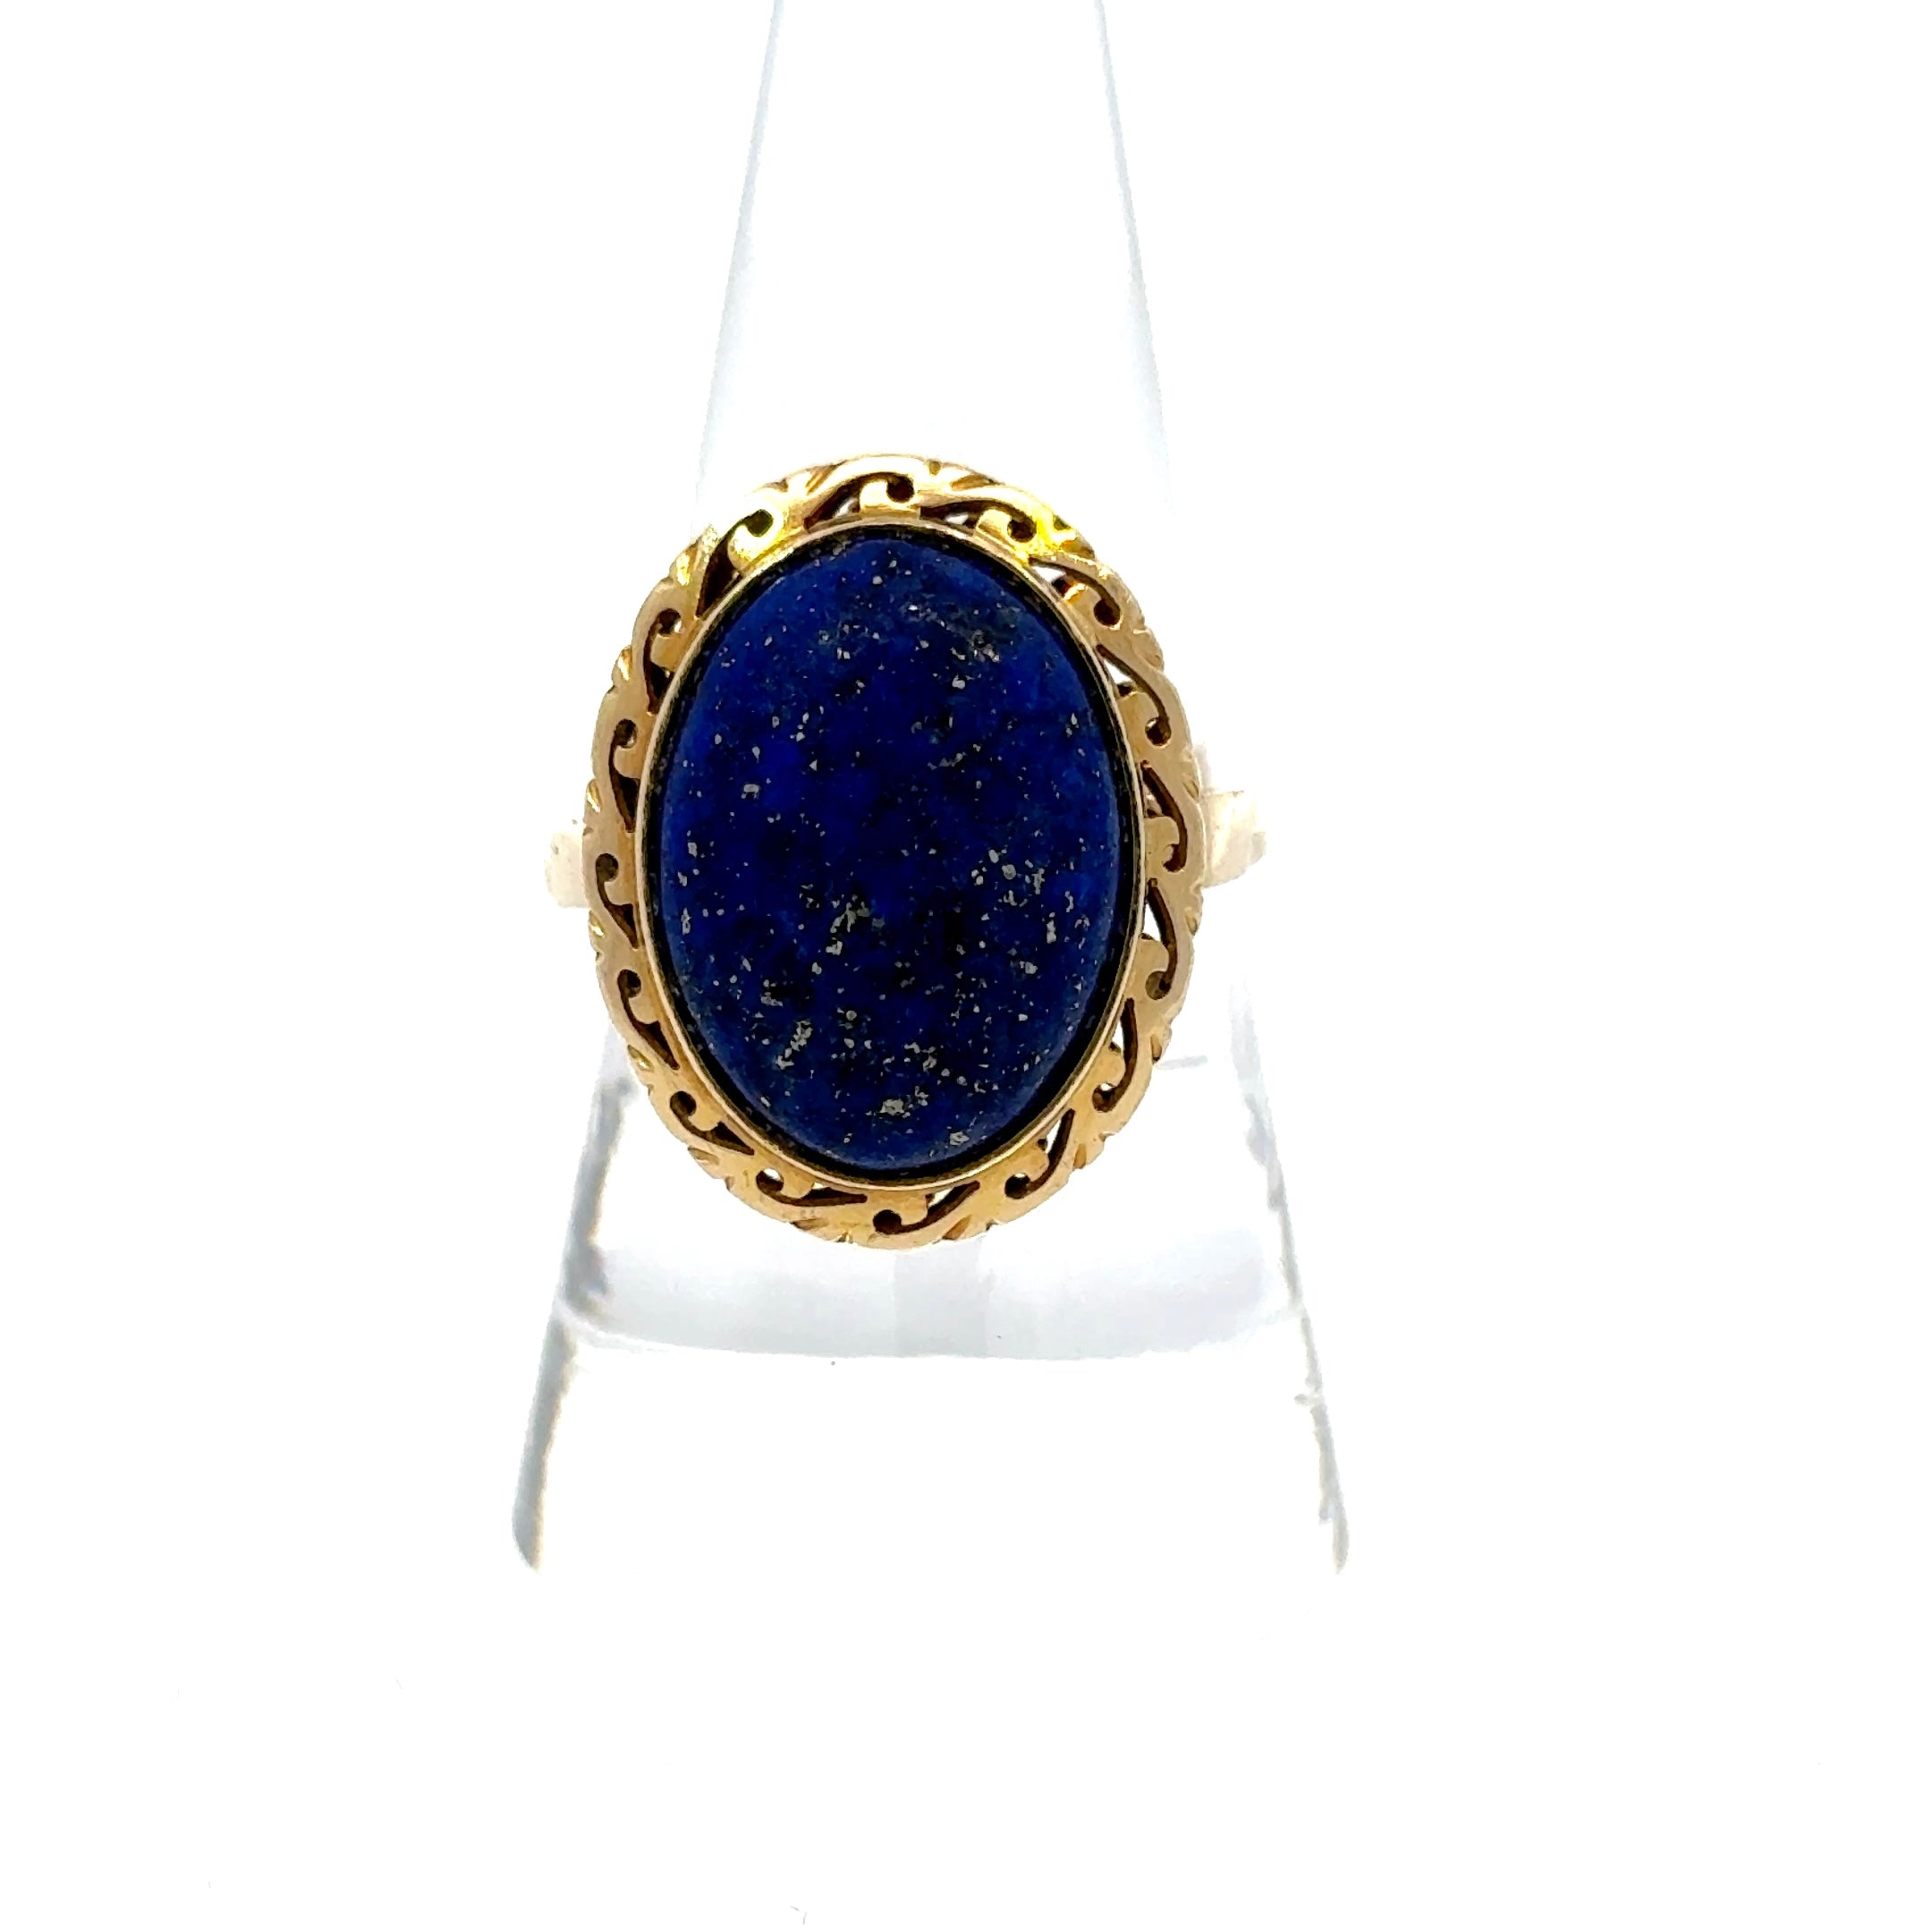 Vintage 1960s Oval Cut Lapis Lazuli Ring in 14K Gold